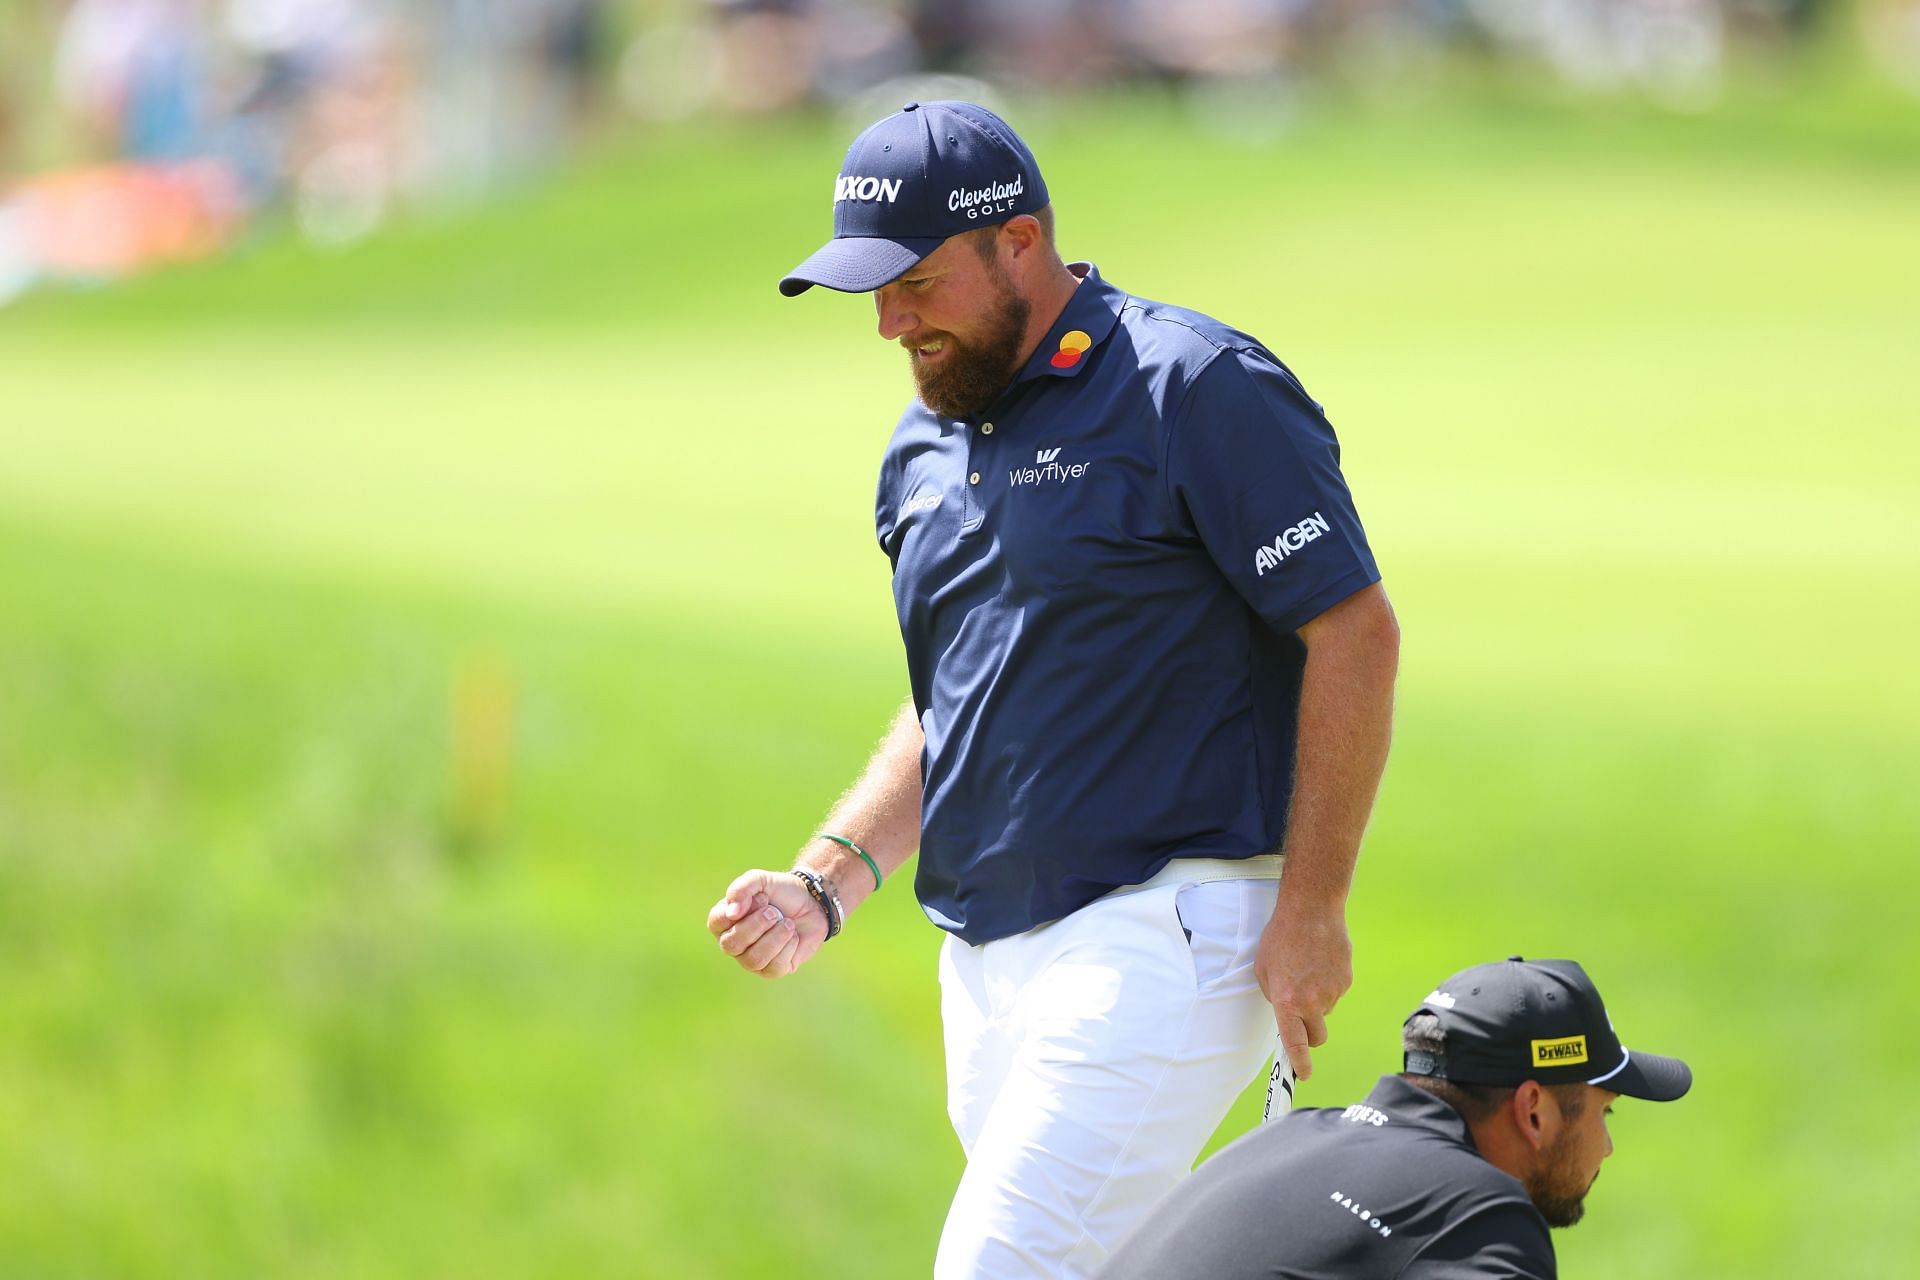 Shane Lowry after a putt at the PGA Championship